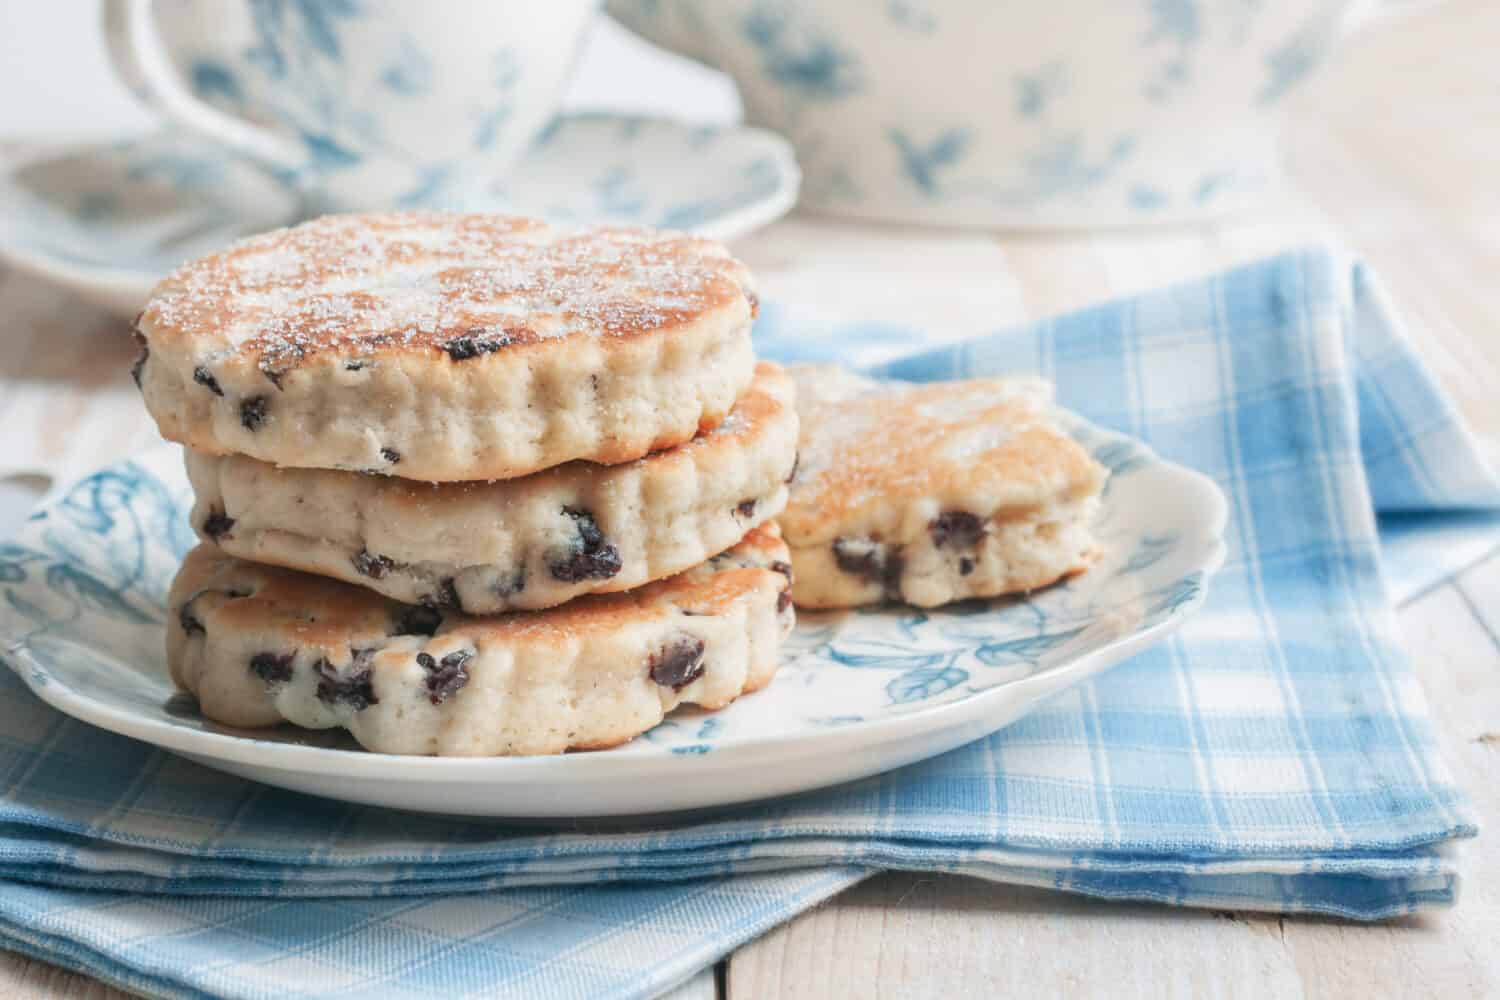 Welsh cakes or Pic ar y maen a traditional griddle cake made with flour and dried fruit 